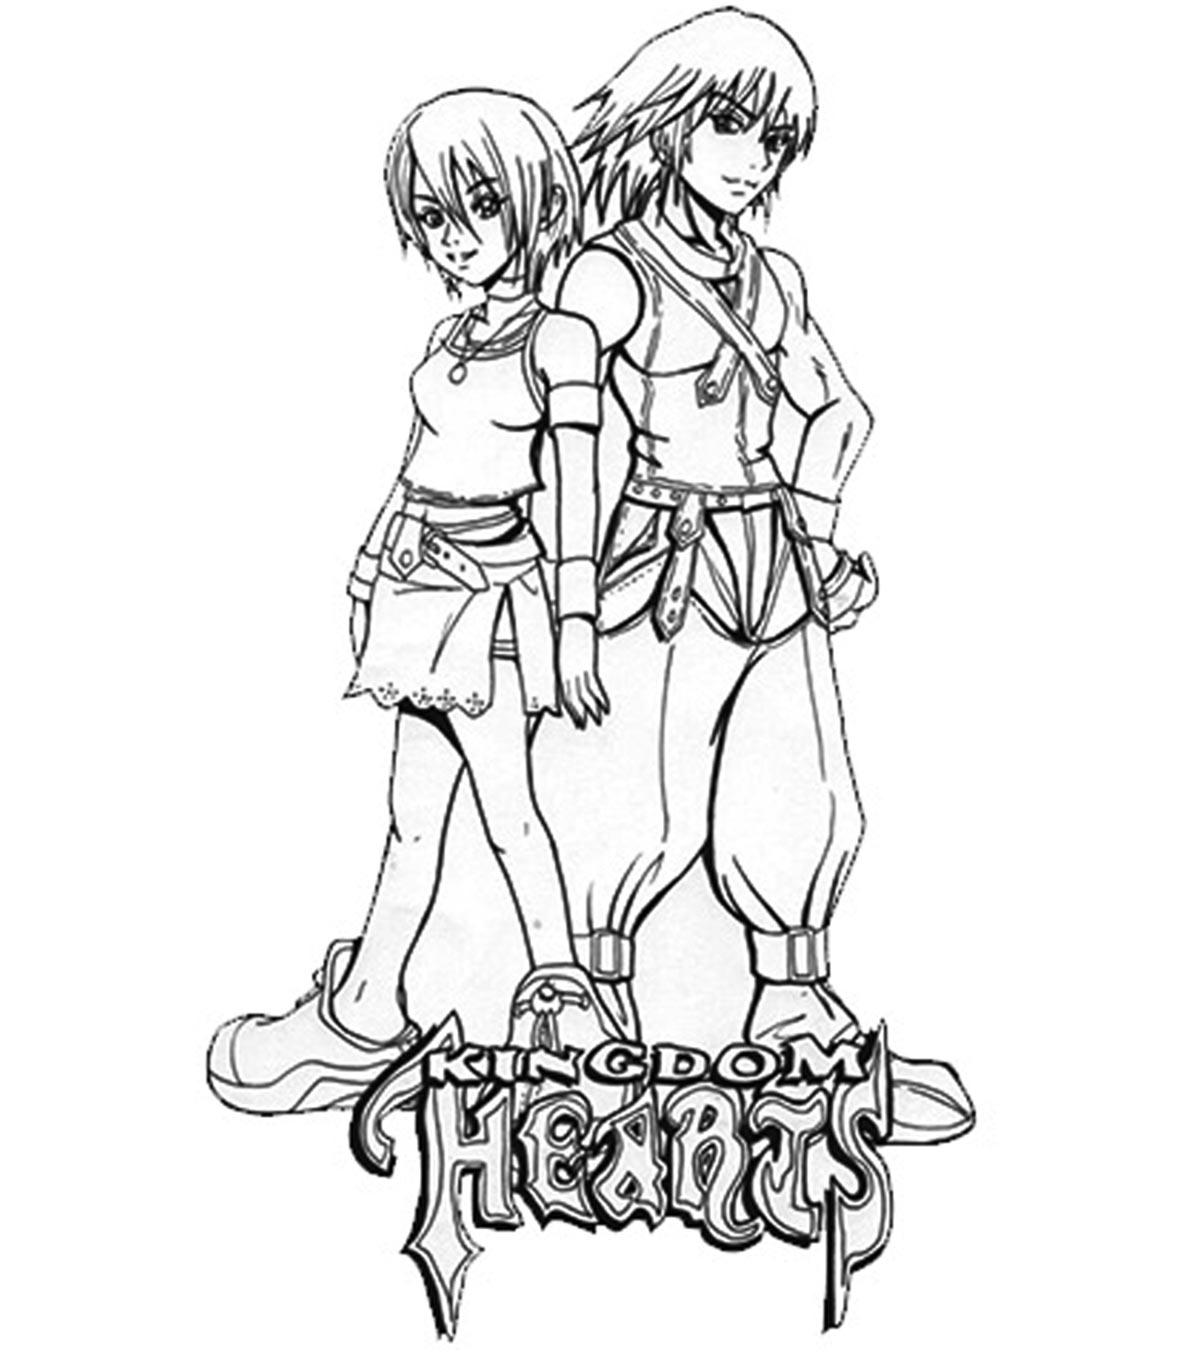 25 Interesting Kingdom Hearts Coloring Pages For Your Little Ones_image